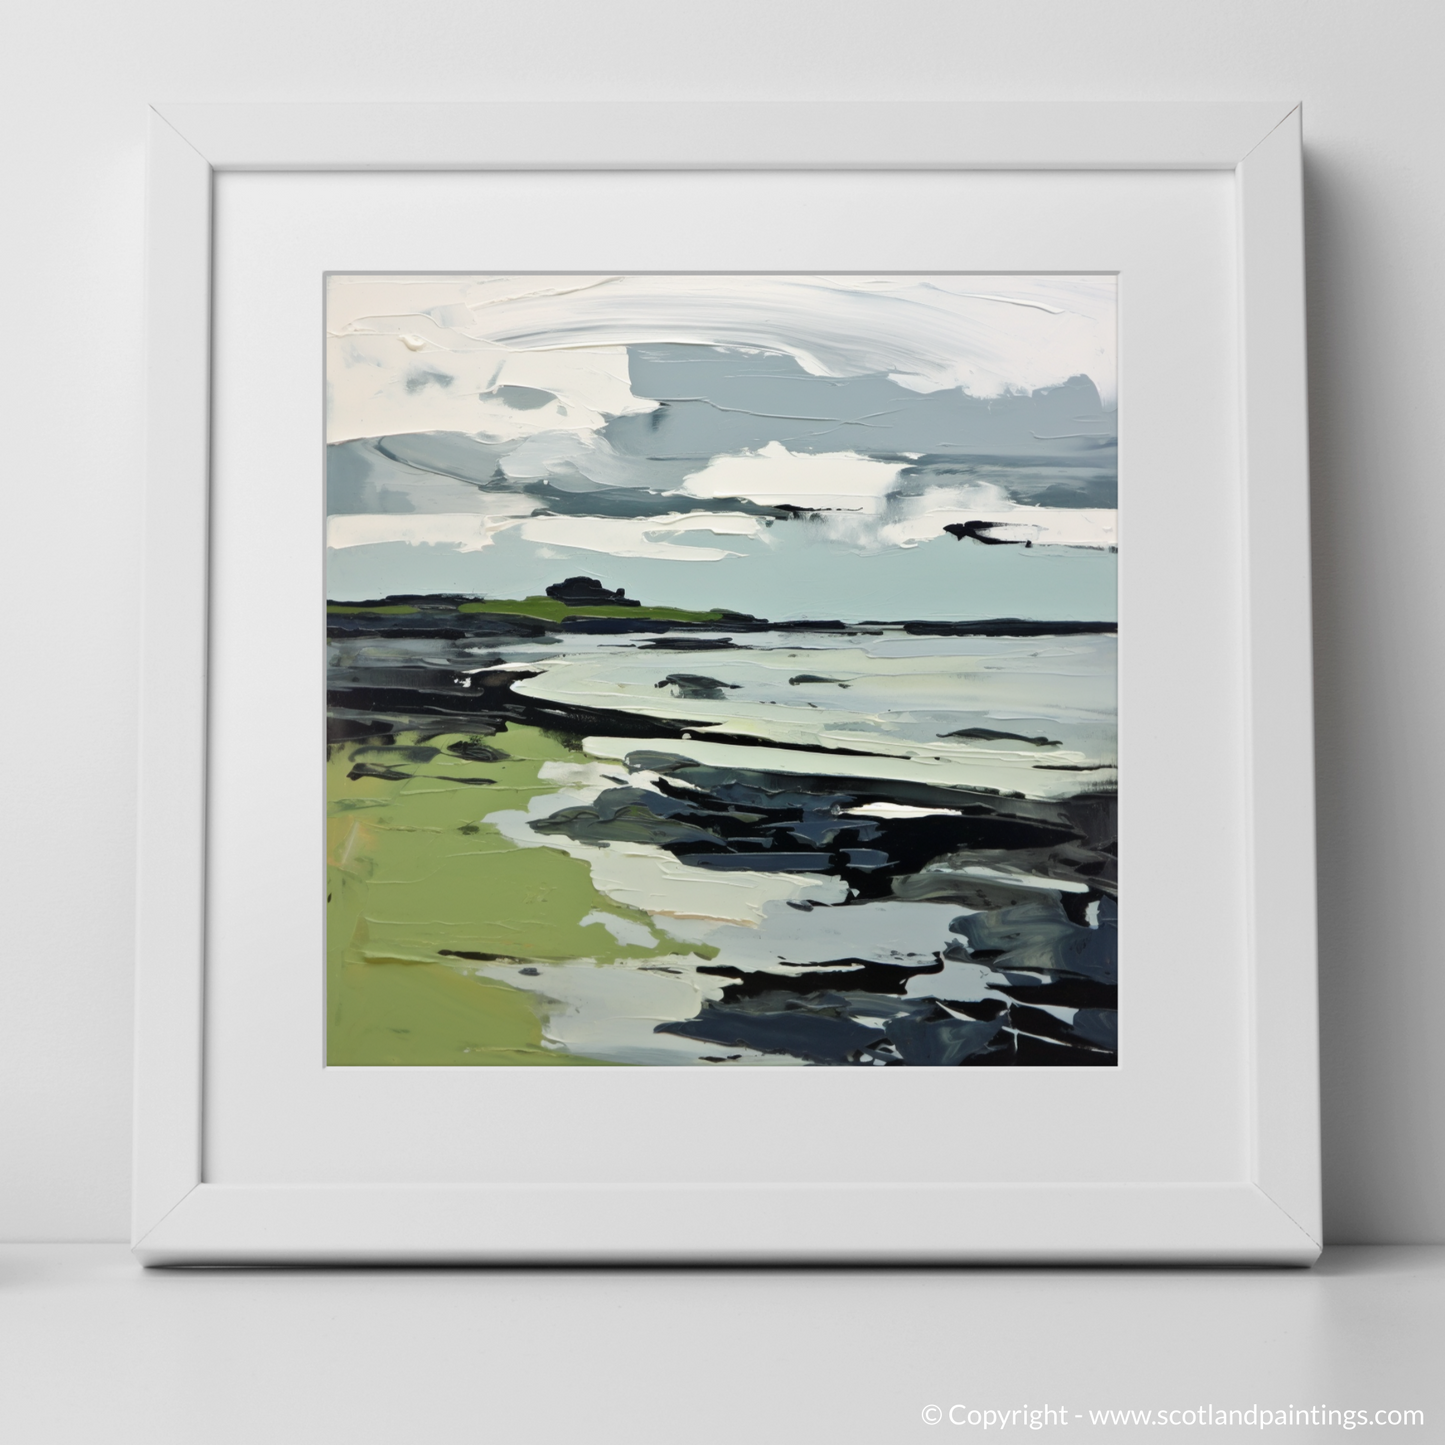 Art Print of Largo Bay, Fife with a white frame